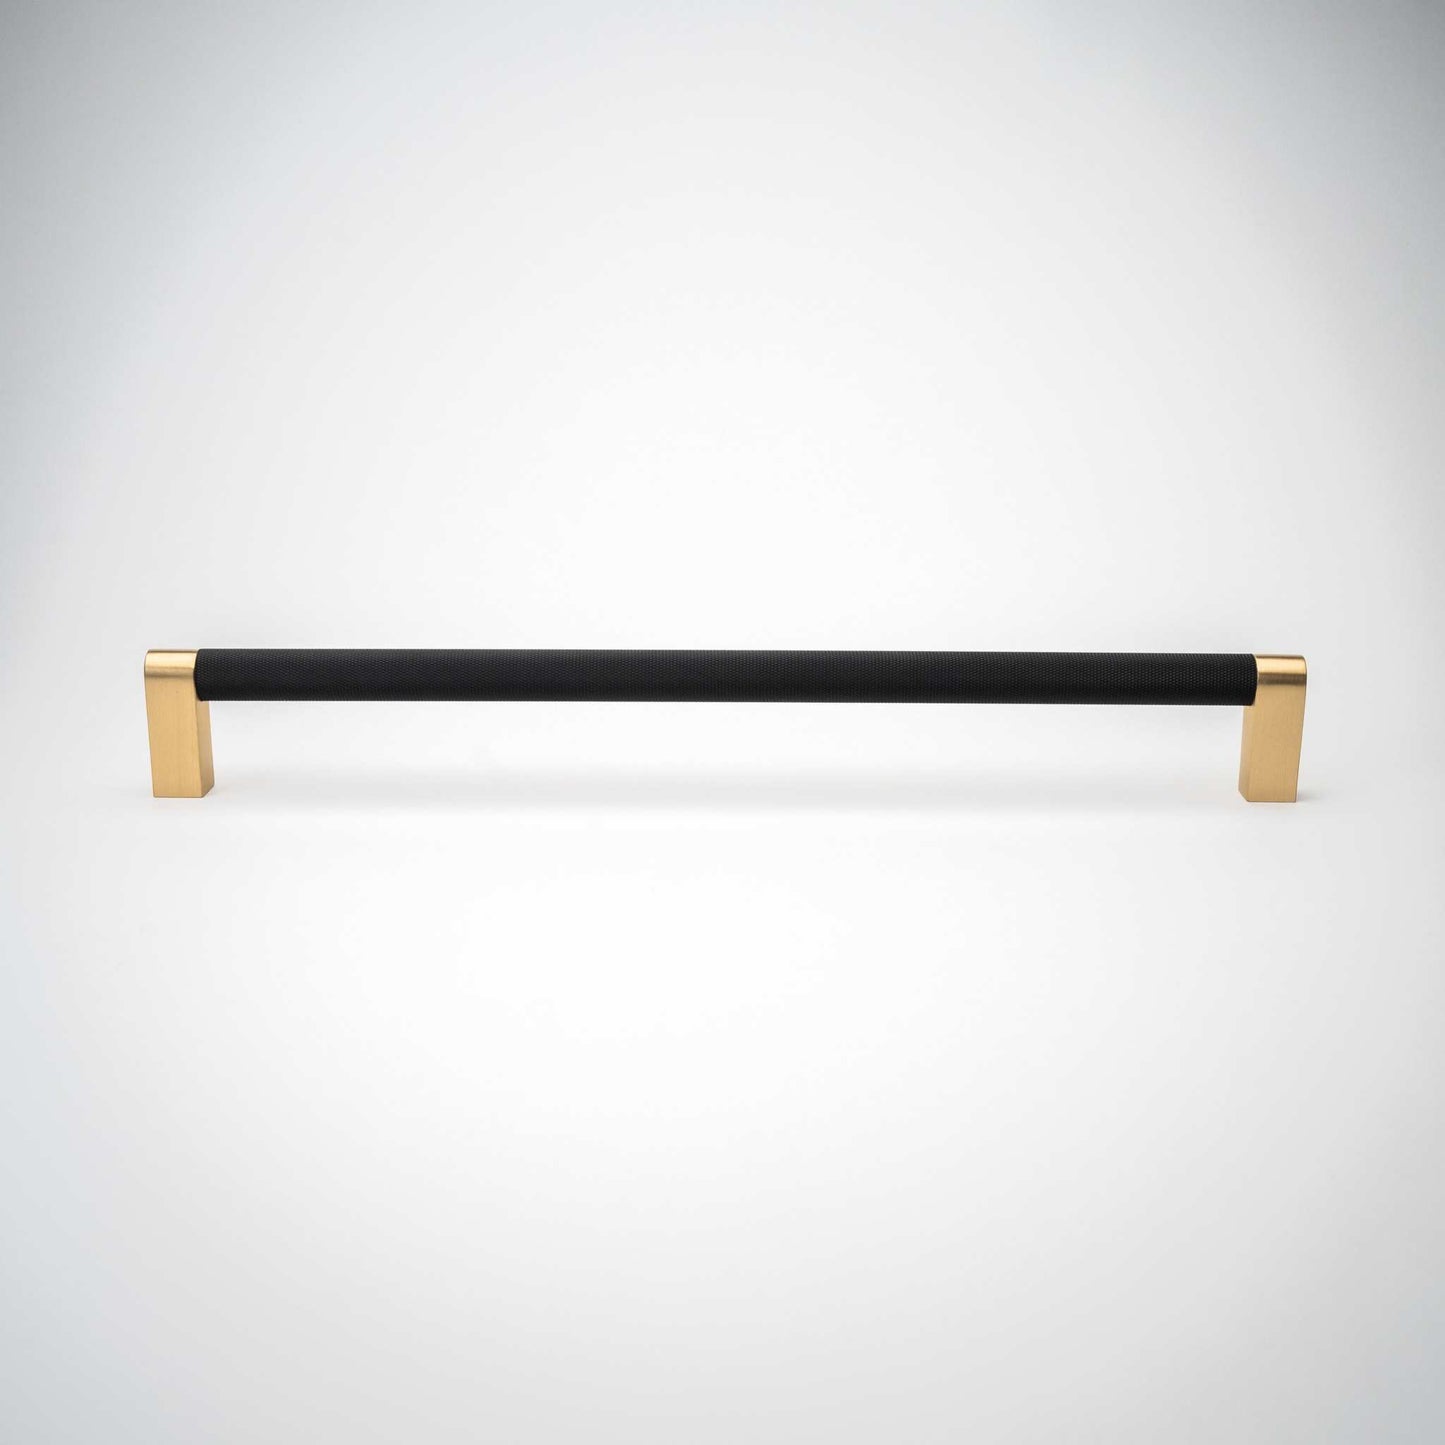 Bold, Black & Gold Knurled Cabinet Pulls Go BOLD in your home!Our Bold, Black and "gold" cabinet pull brings a modern feel to your cabinetry. Its two-toned style is visually fresh, while its knurled matpullBold, Black & Gold Knurled Solid Brass Cabinet Pulls